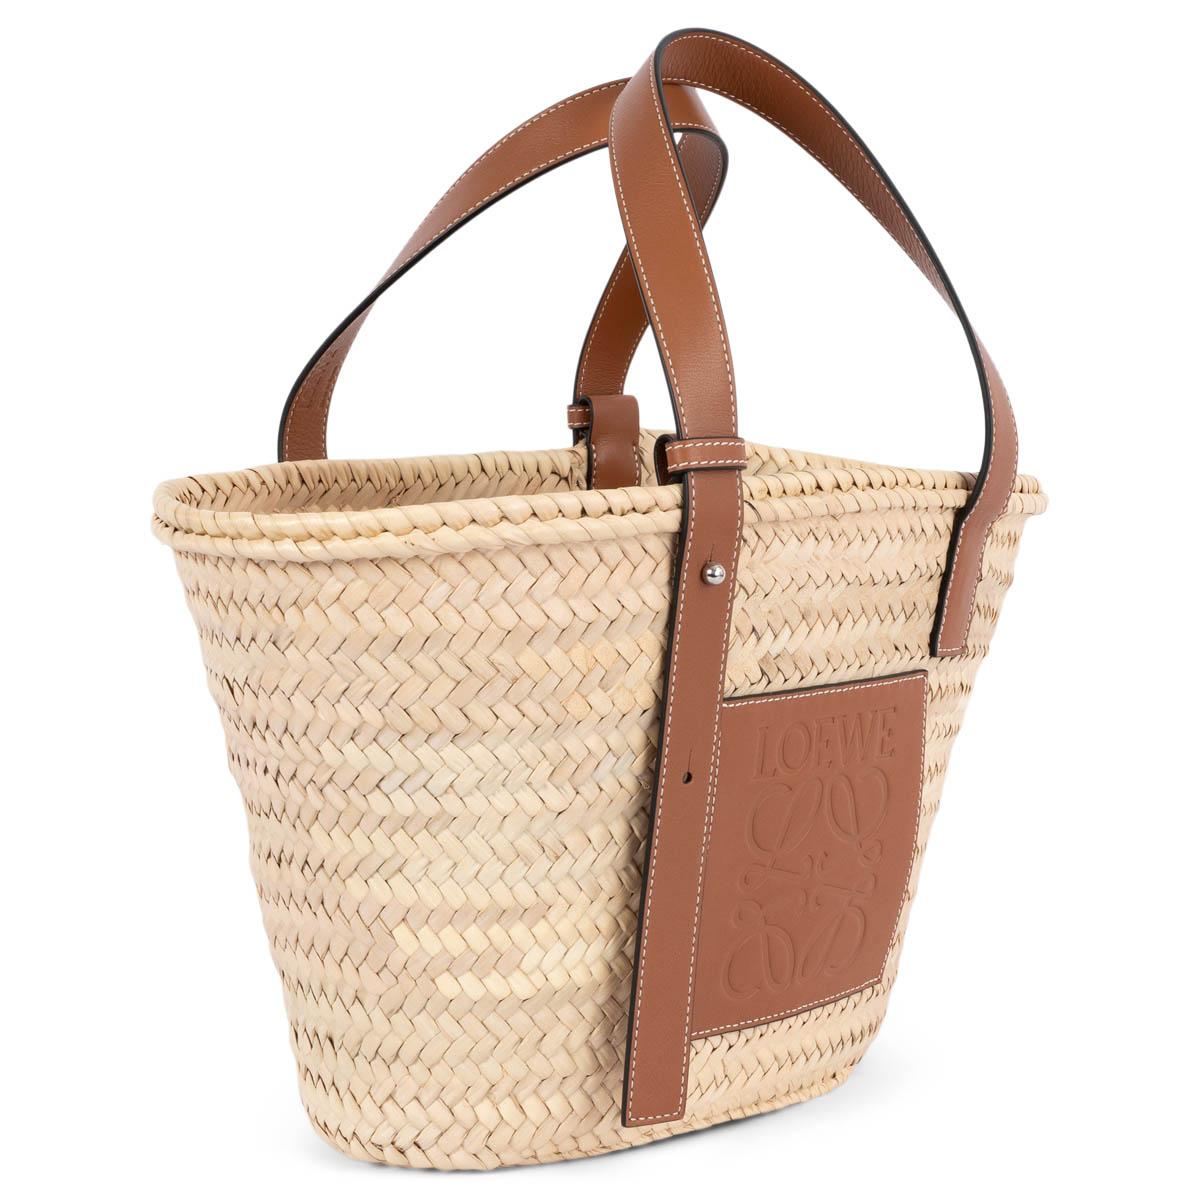 100% authentic Loewe basket medium tote in palm leaf and cognac brown calfskin with logo embossed front patch. Unlined. Has been carried once or twice and is in virtually new condition. 

Measurements
Height	24cm (9.4in)
Width	24cm